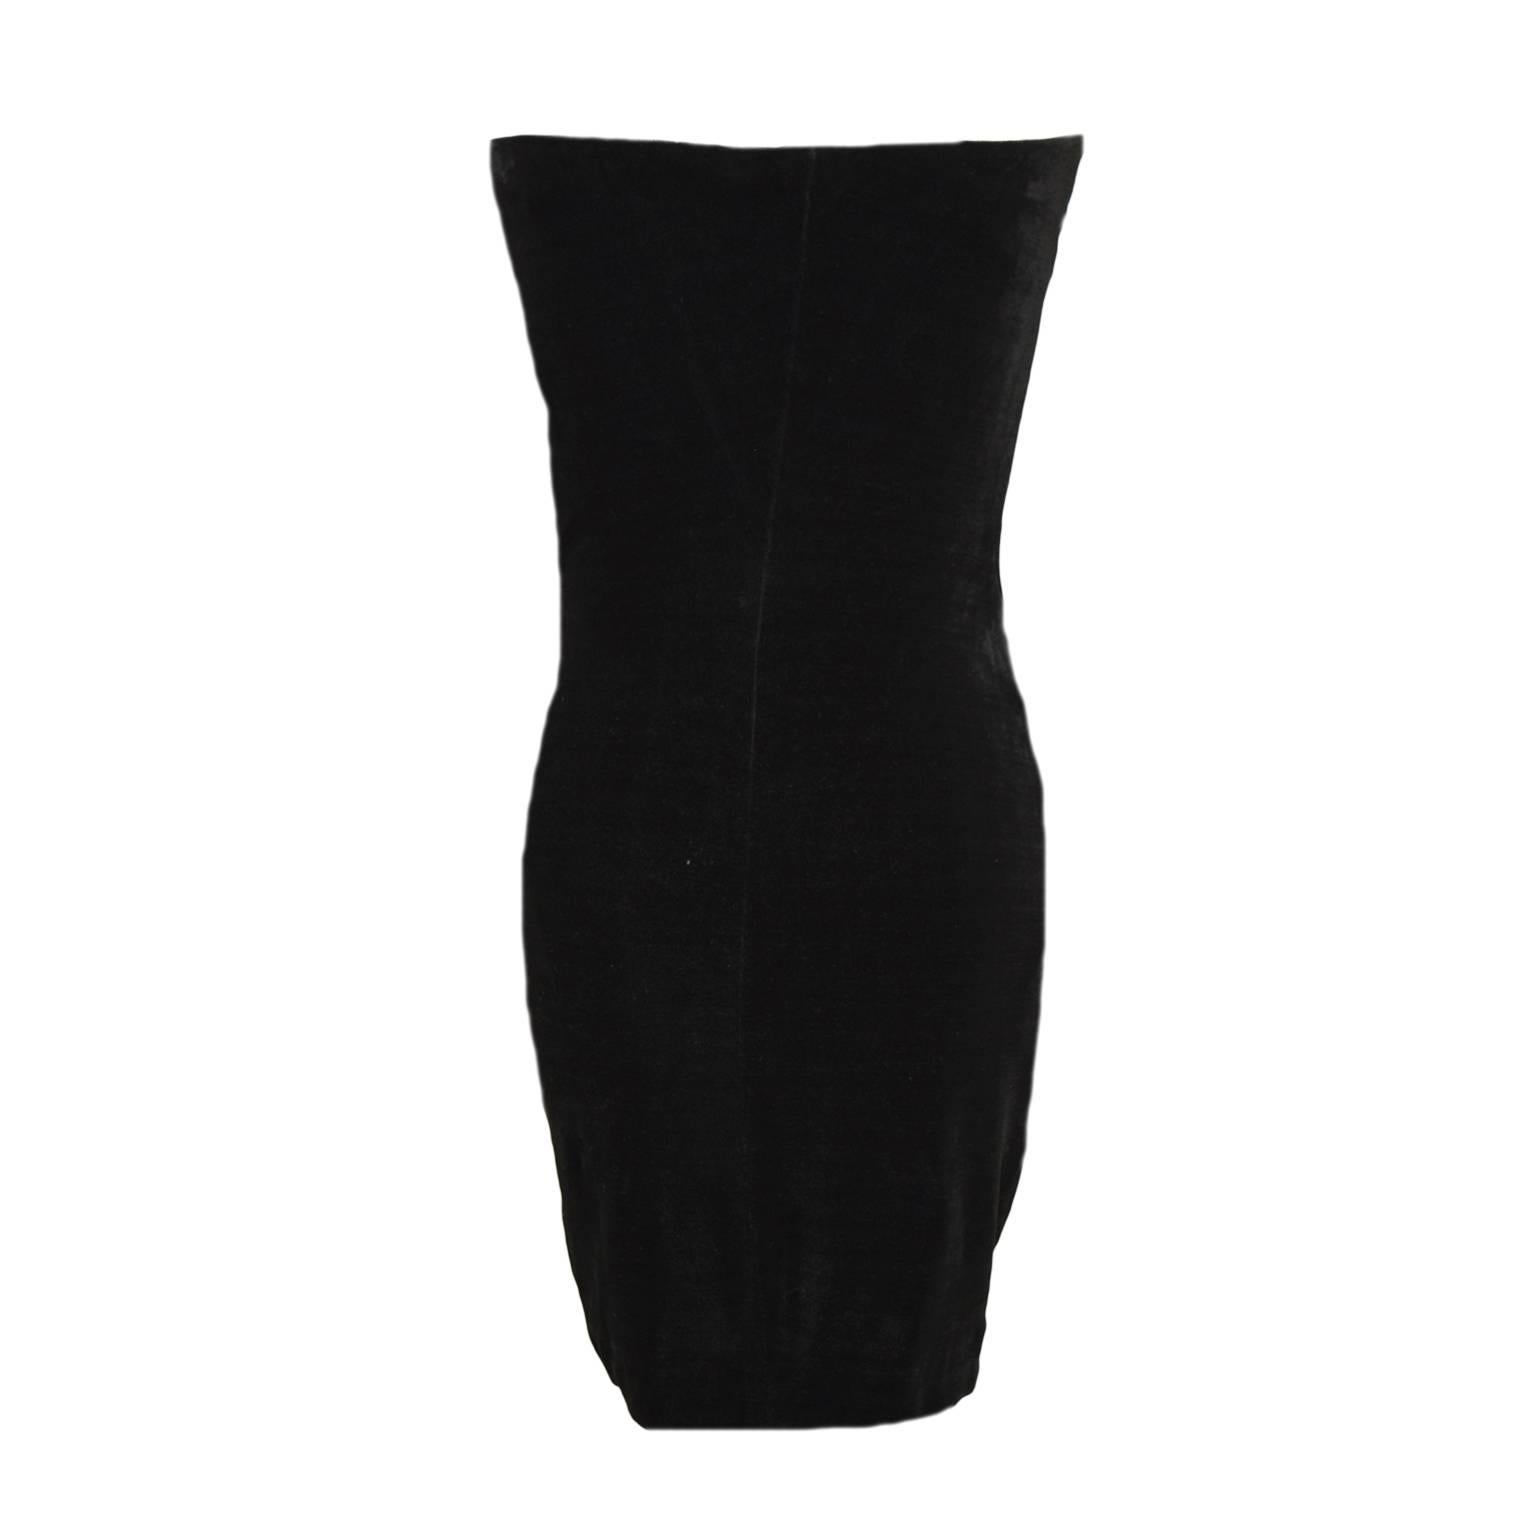 This dress by Donna Karan is a vintage find. Made out of black velvet, this dress is a bodycon cocktail dress. There is a lace body suit with snapped closures lined on the inner part of the dress.